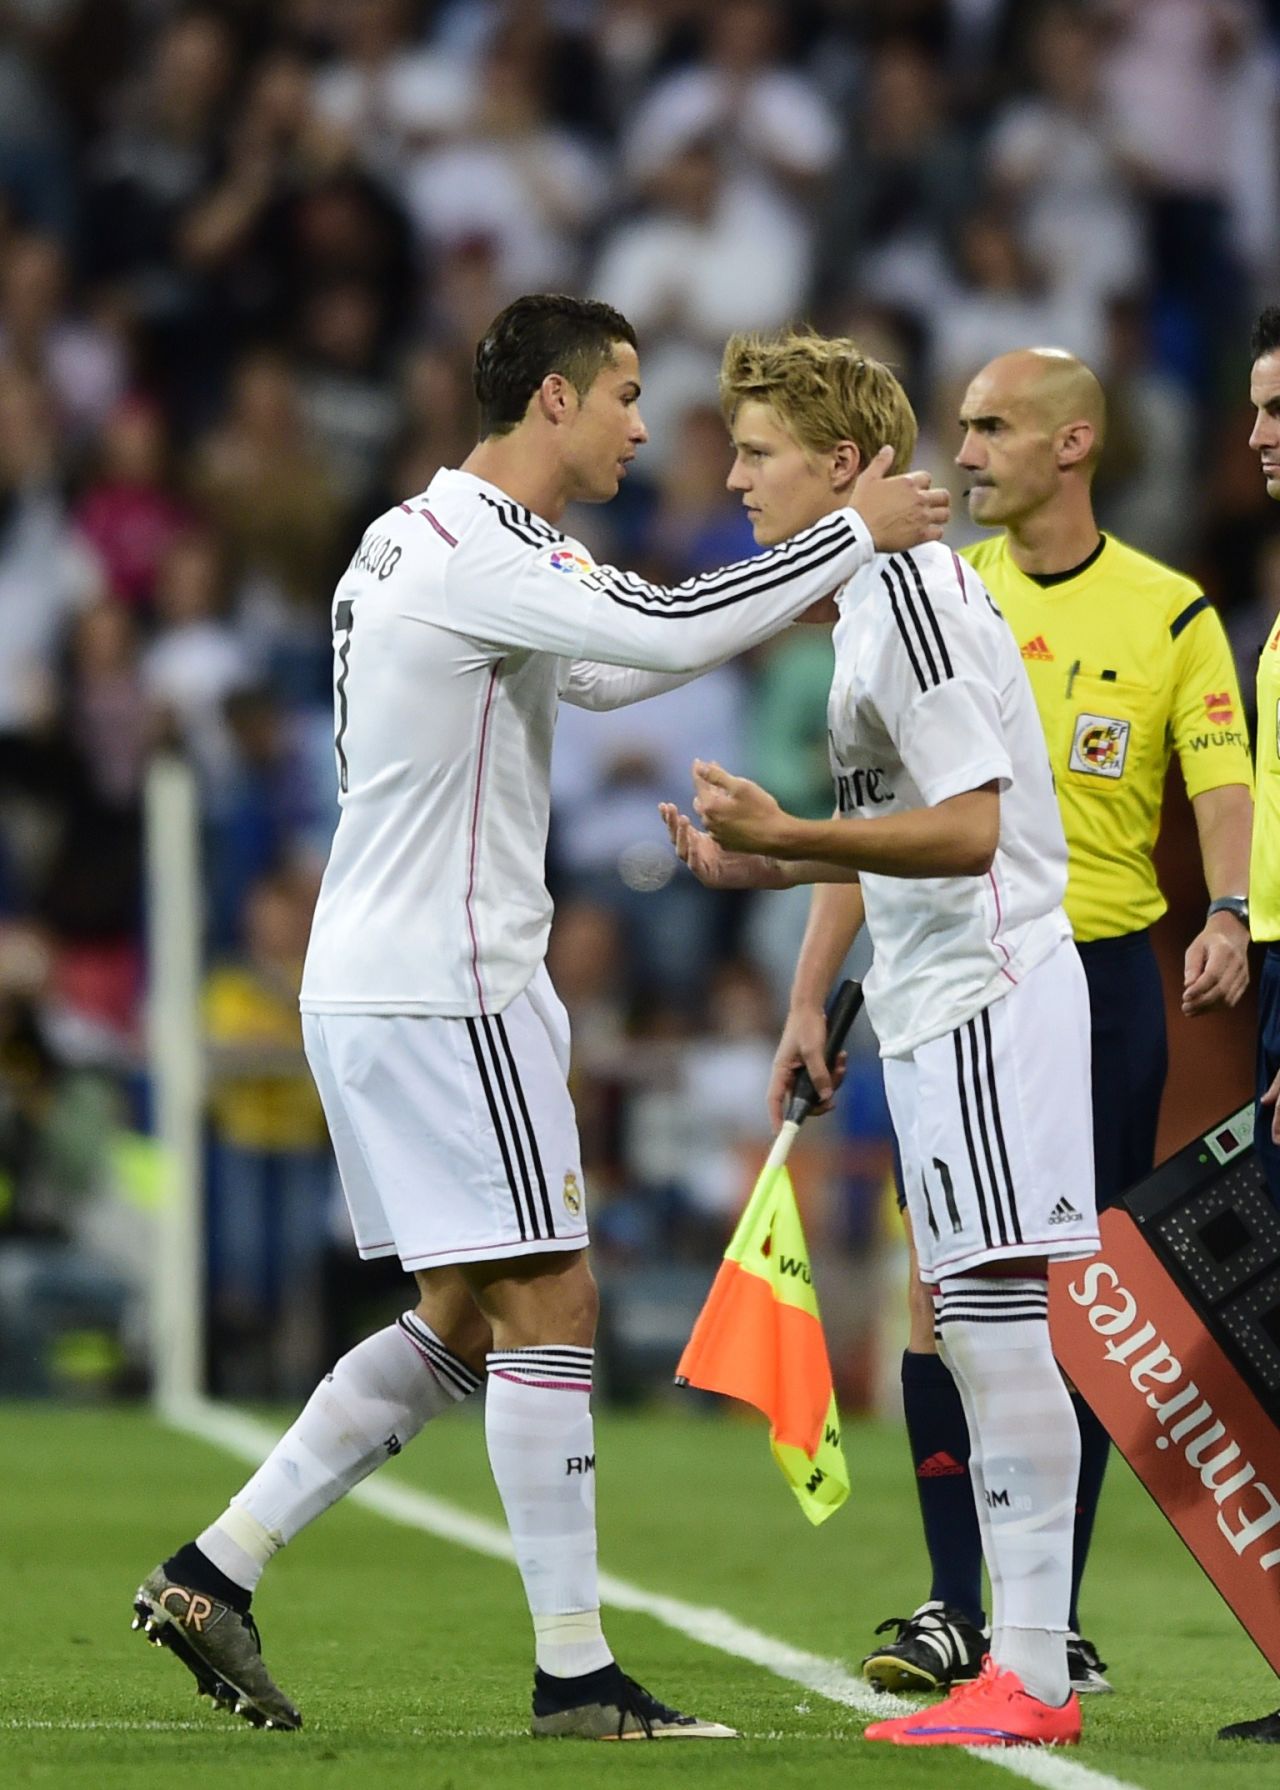 Real Madrid's key signing of the January 2015 transfer window was Martin Odegaard (pictured right with Cristiano Ronaldo). The Norwegian teenager had attracted the attention of the world's biggest clubs.